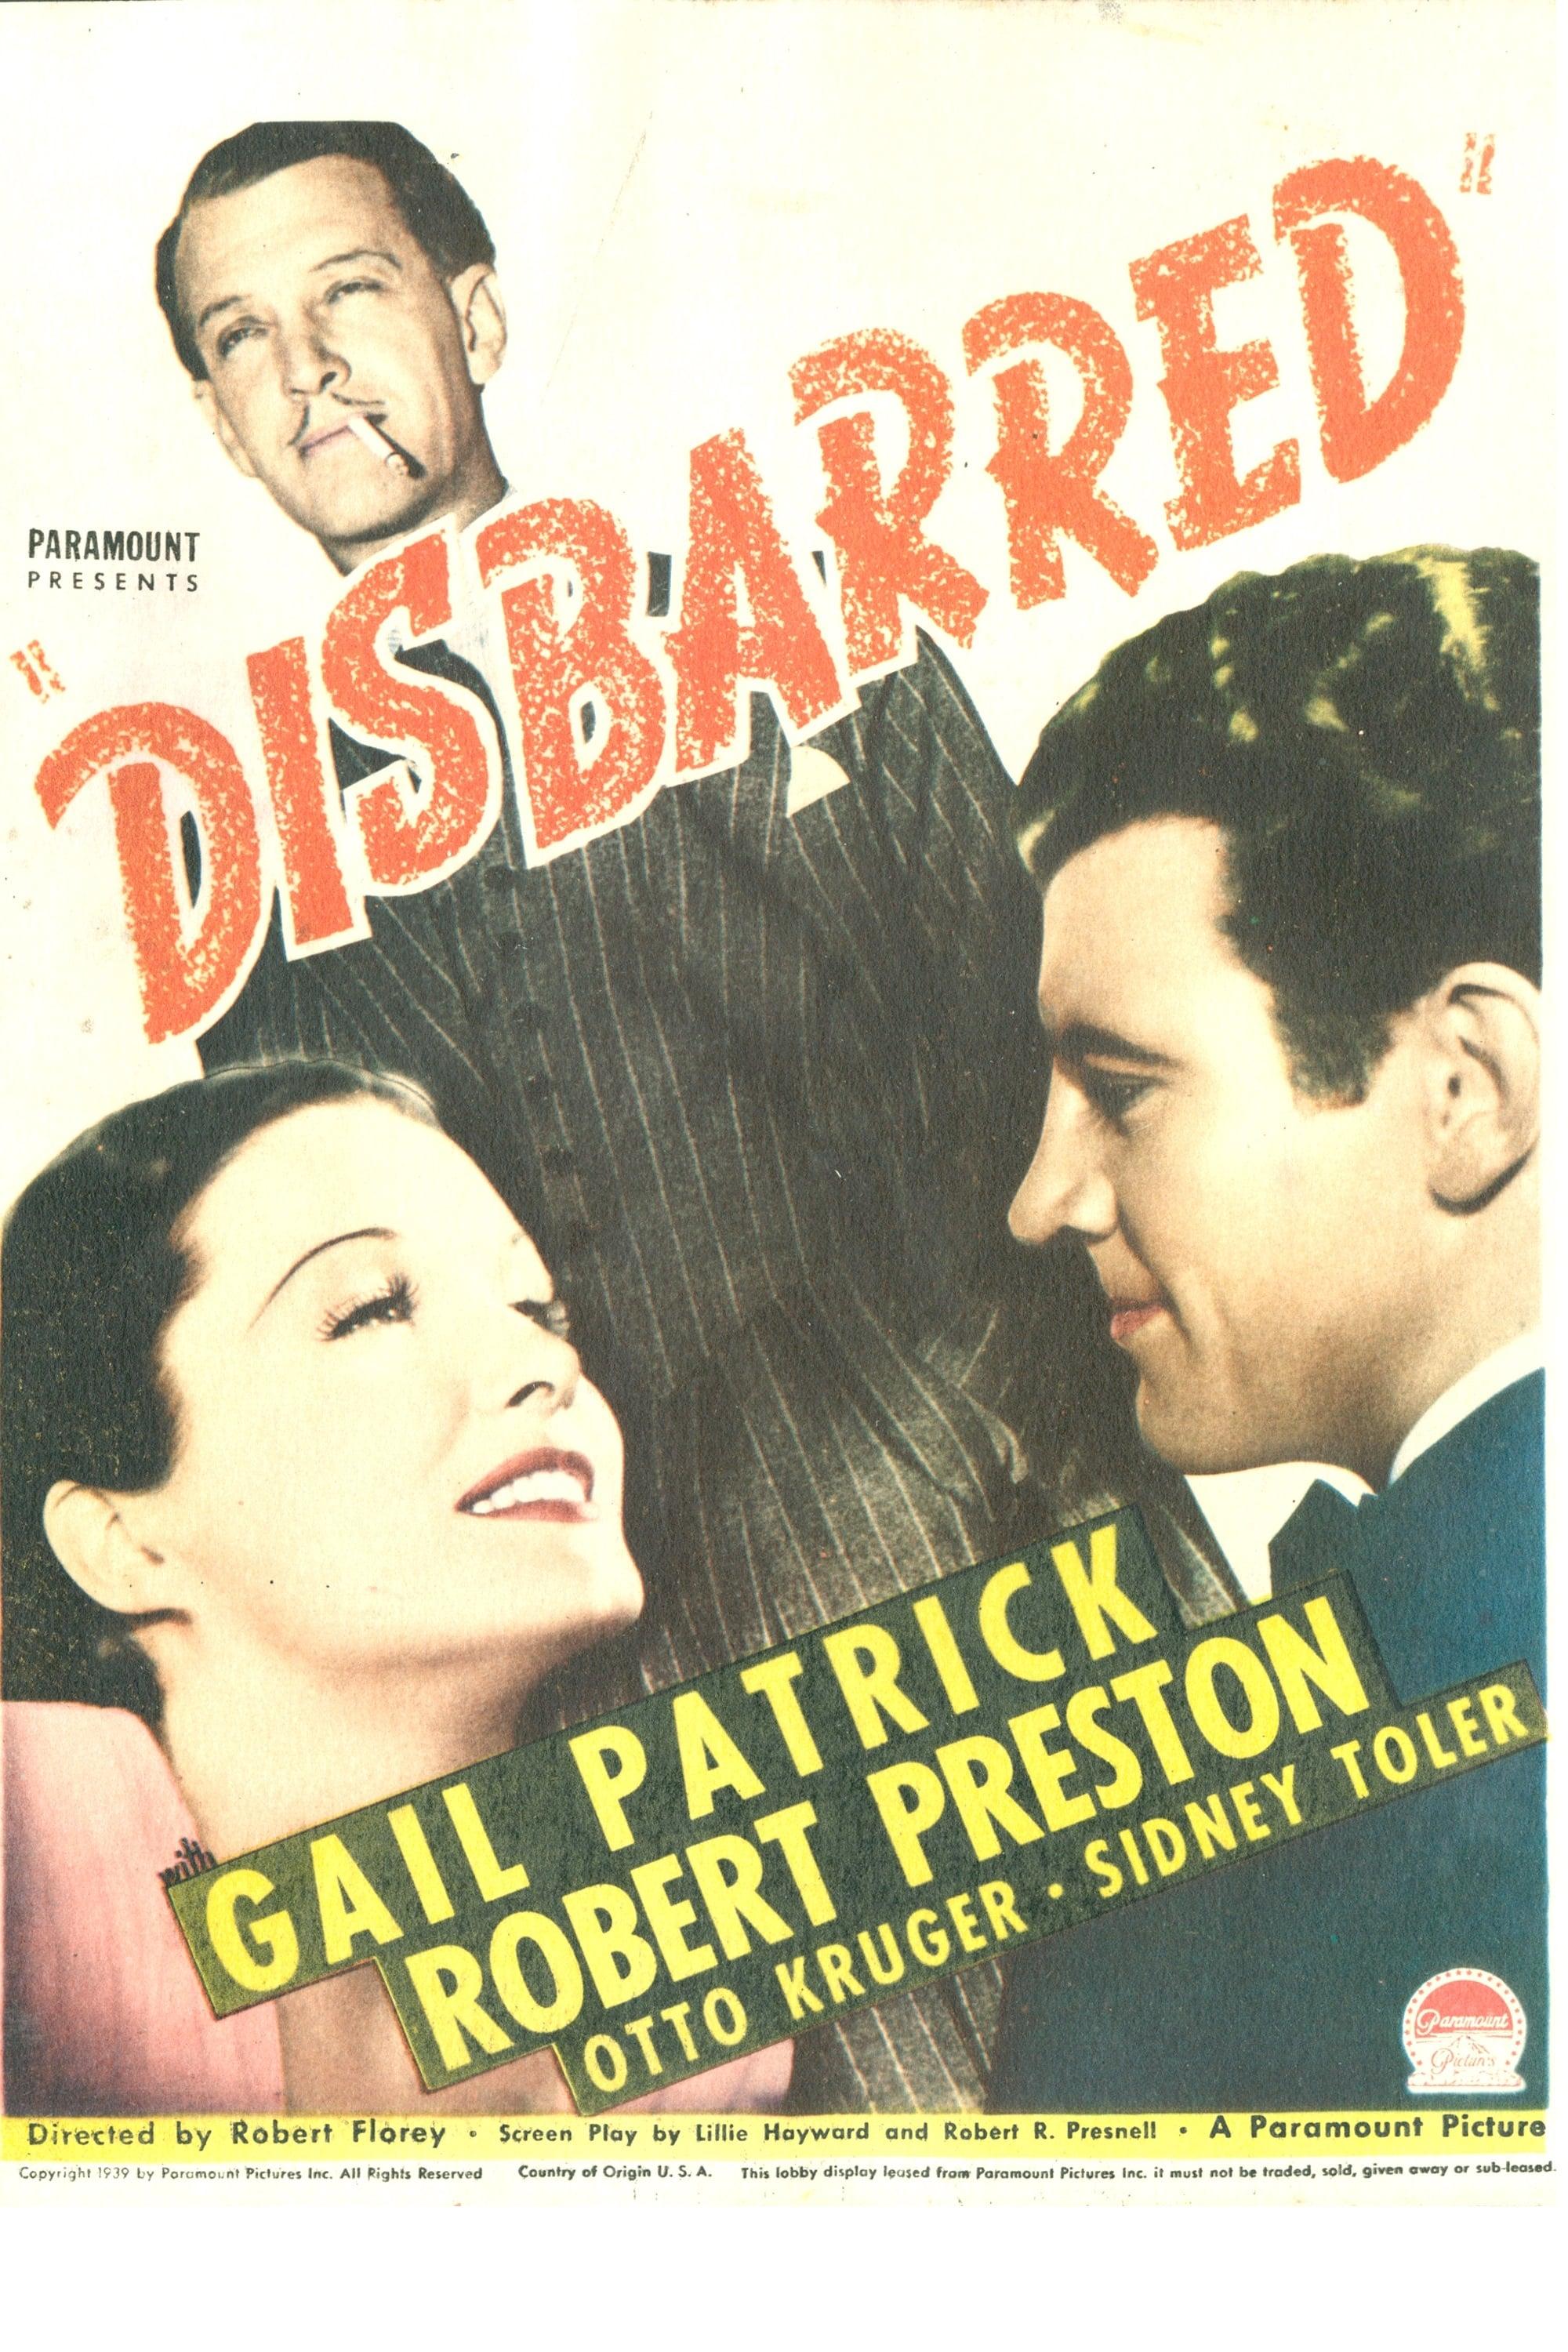 Disbarred poster